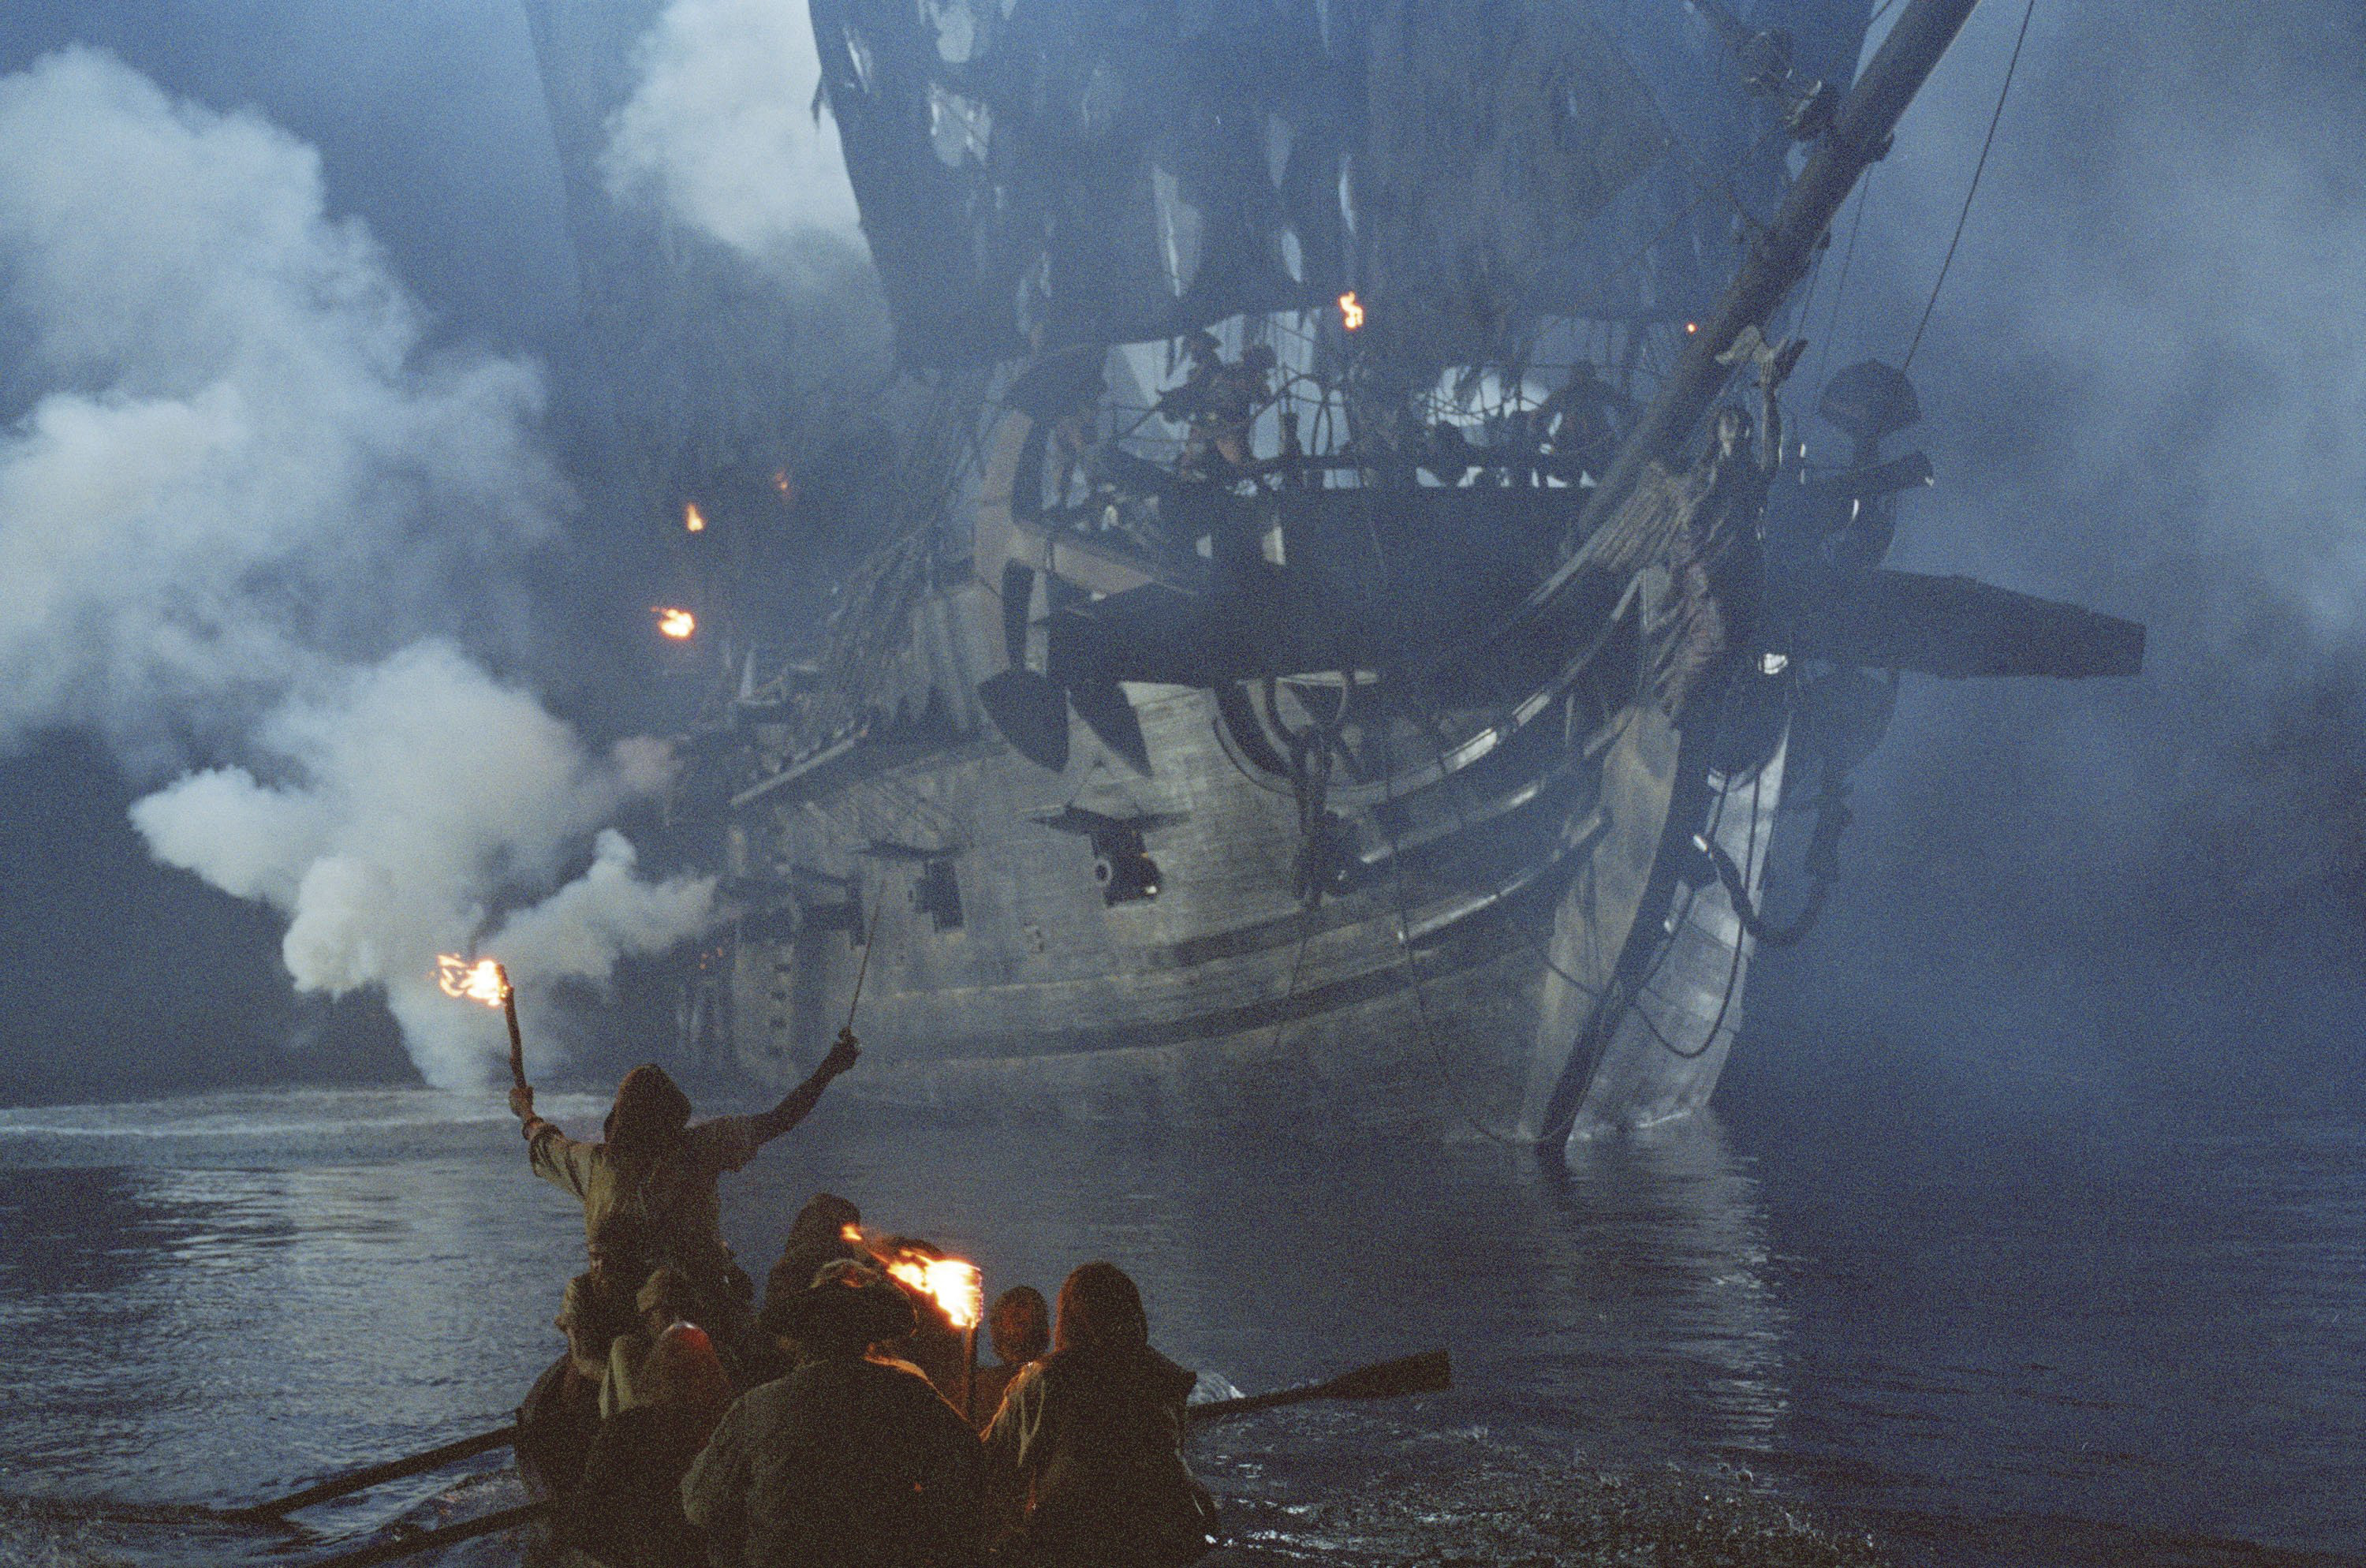 pirates of the caribbean, movie, pirates of the caribbean: the curse of the black pearl HD wallpaper